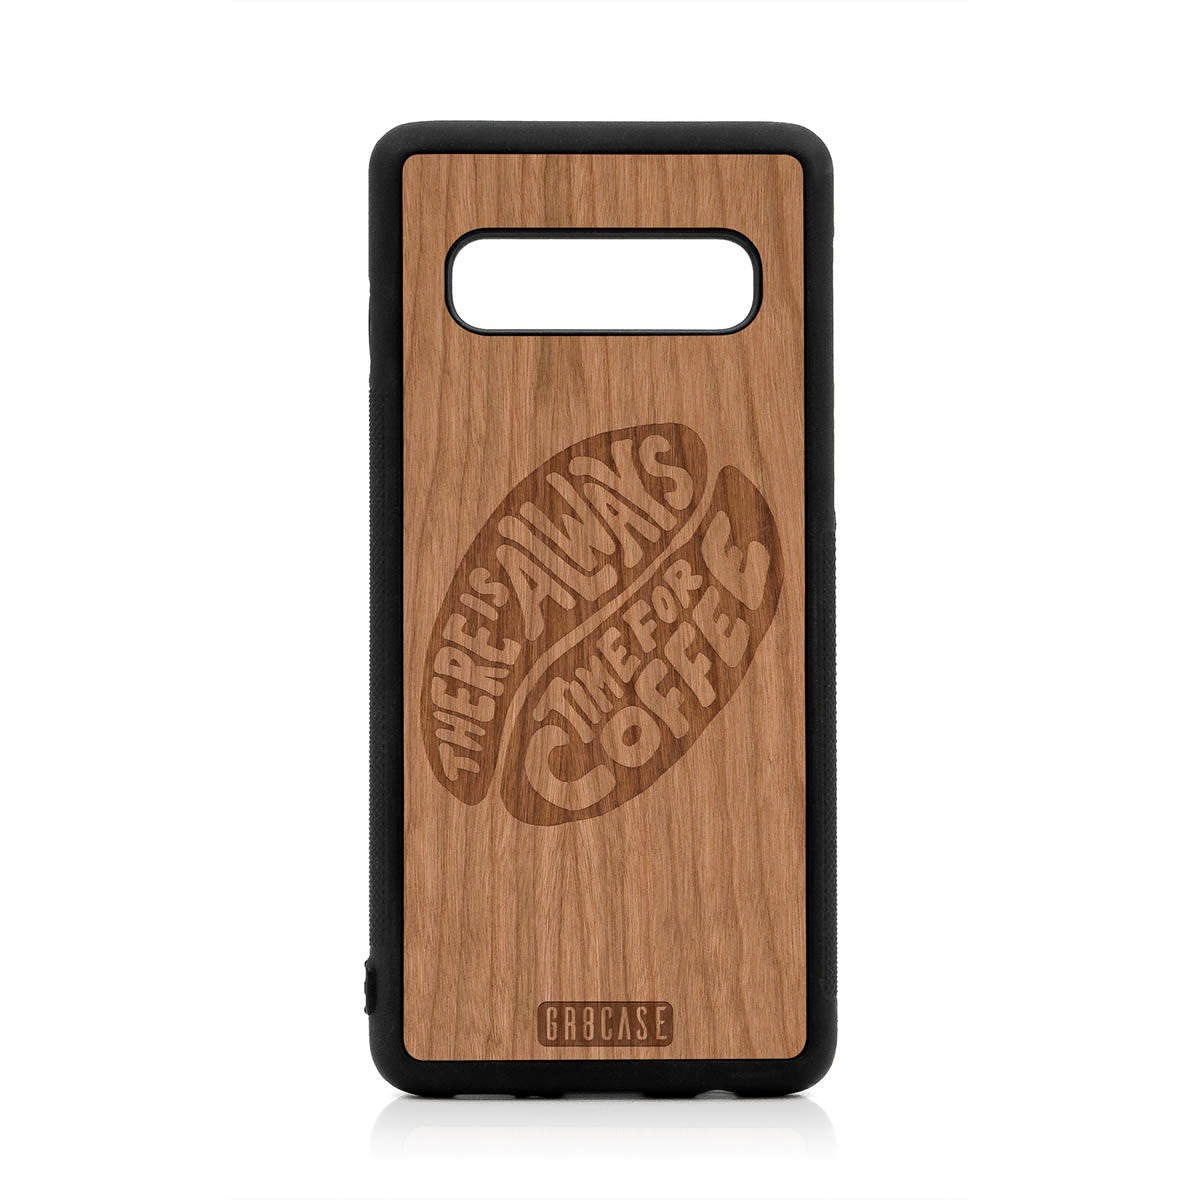 There Is Always Time For Coffee Design Wood Case For Samsung Galaxy S10